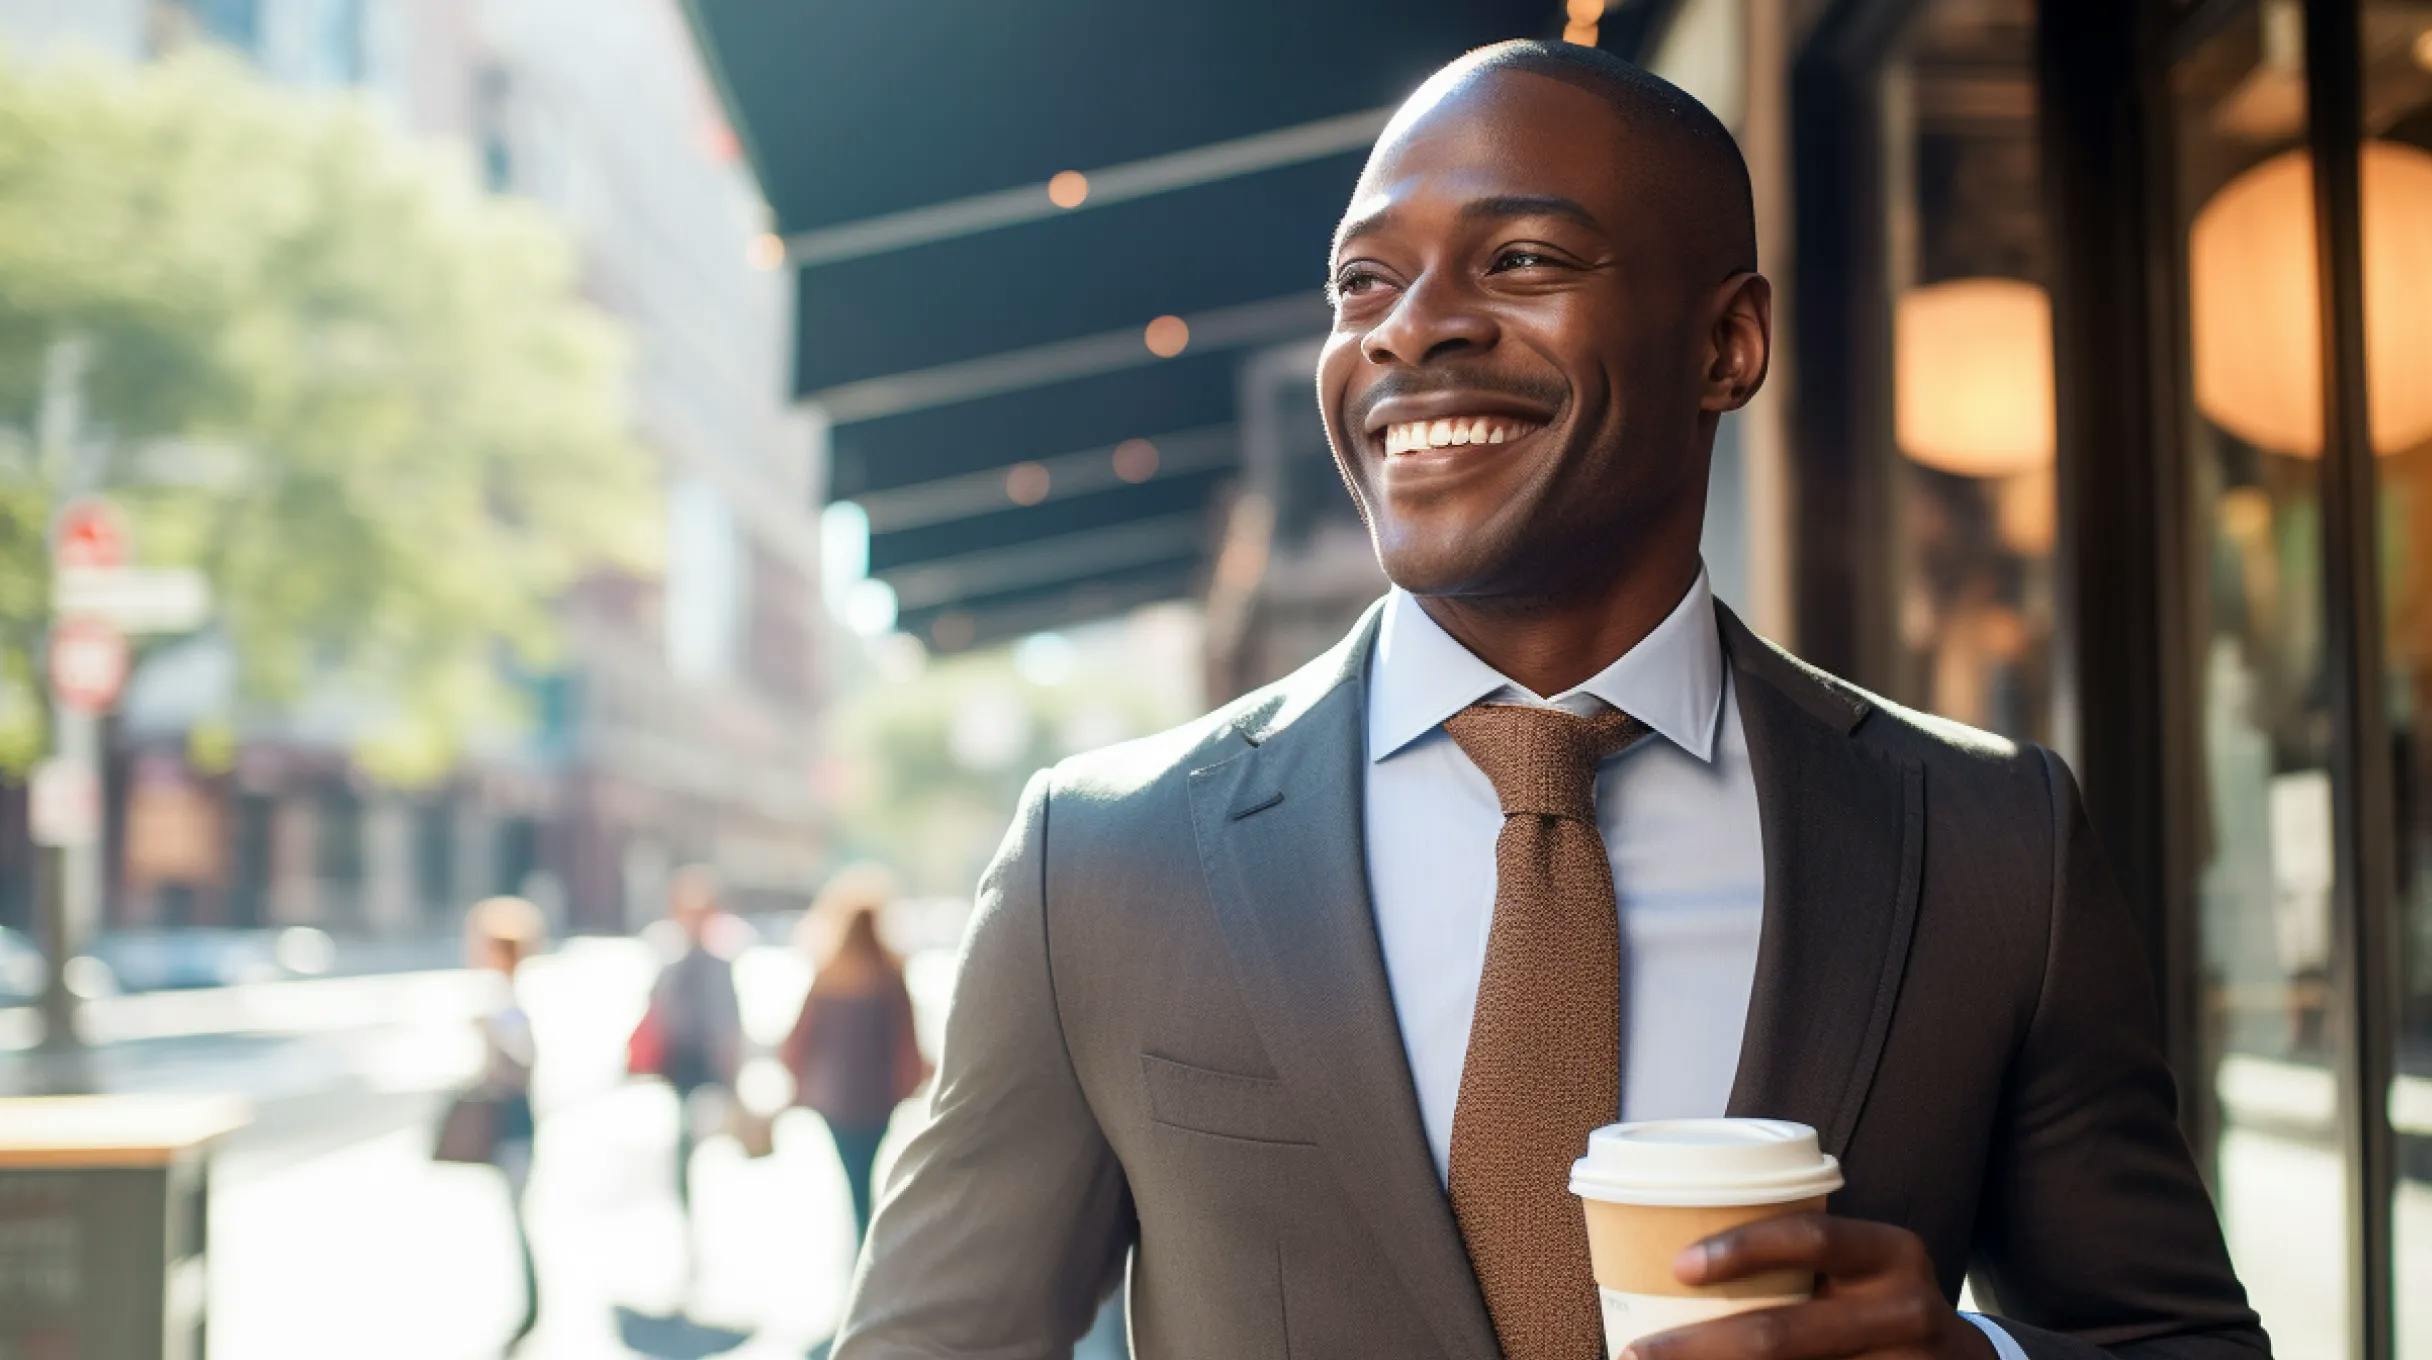 A professional man in a suit holding a coffee cup, ready to start his day with a warm beverage.